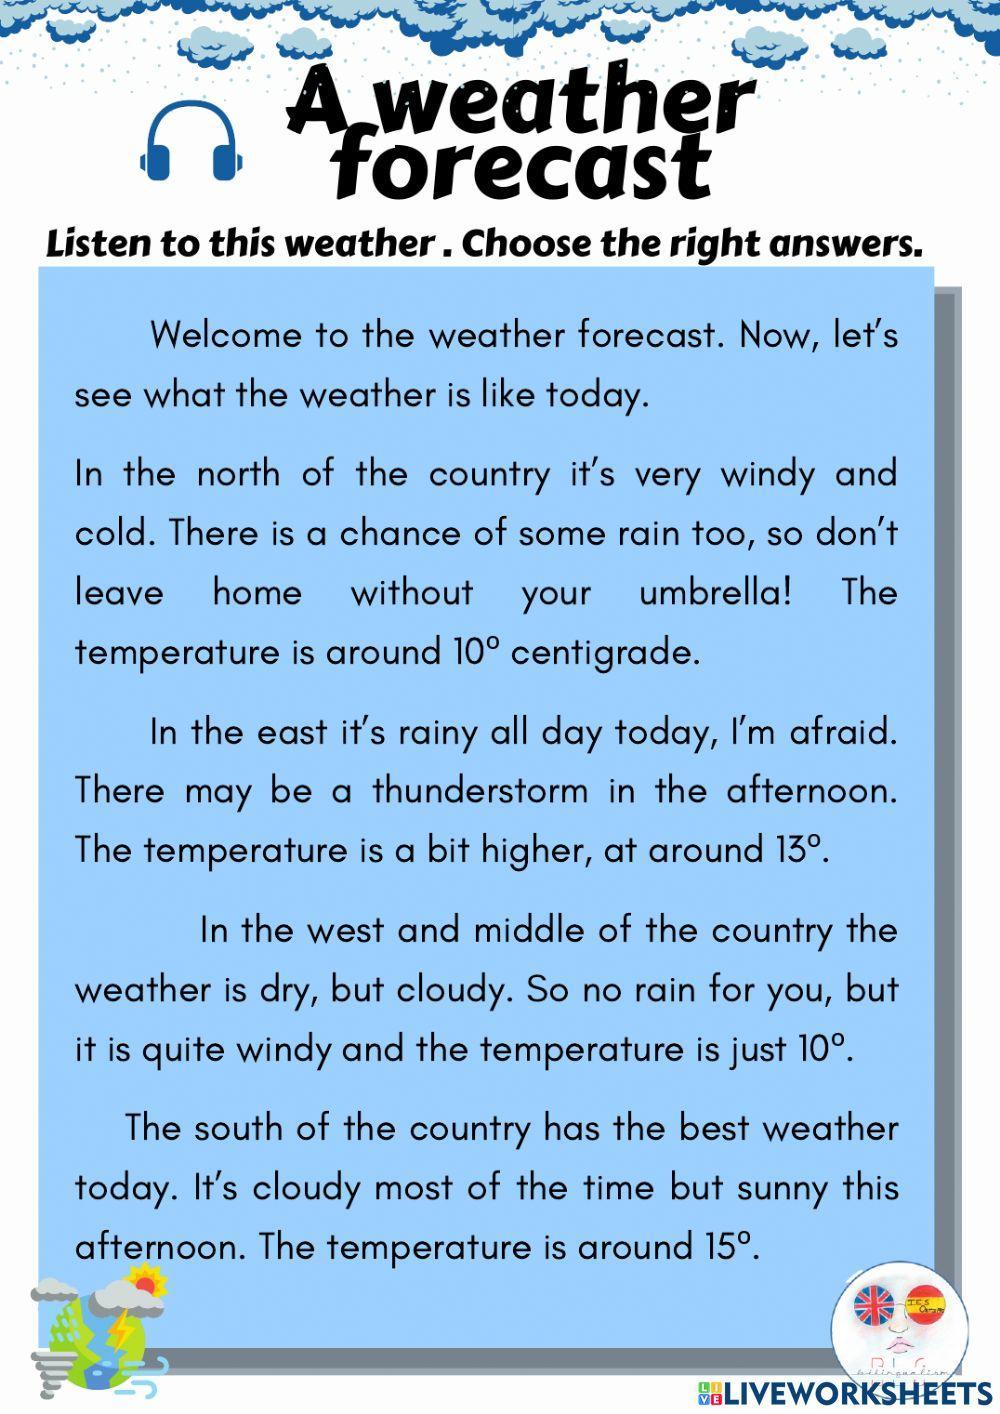 Listening to a weather forecast